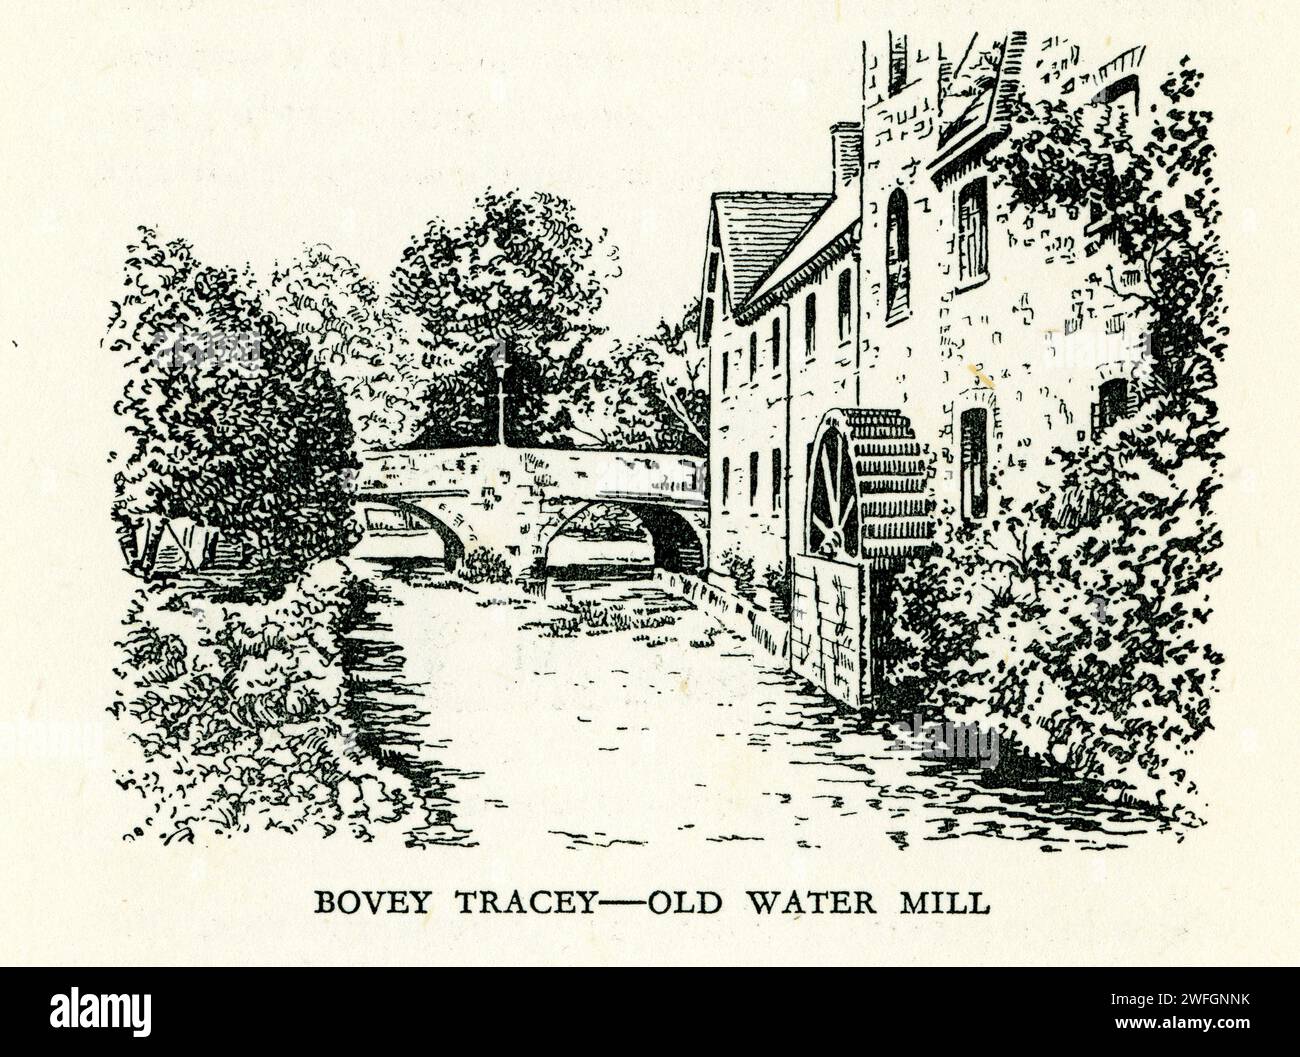 Pen and ink sketch - Bovey Tracey Old Water Mill, Devon.  by S.P.B. Mais, published by London Great Western Railway Company, 1928 Stock Photo